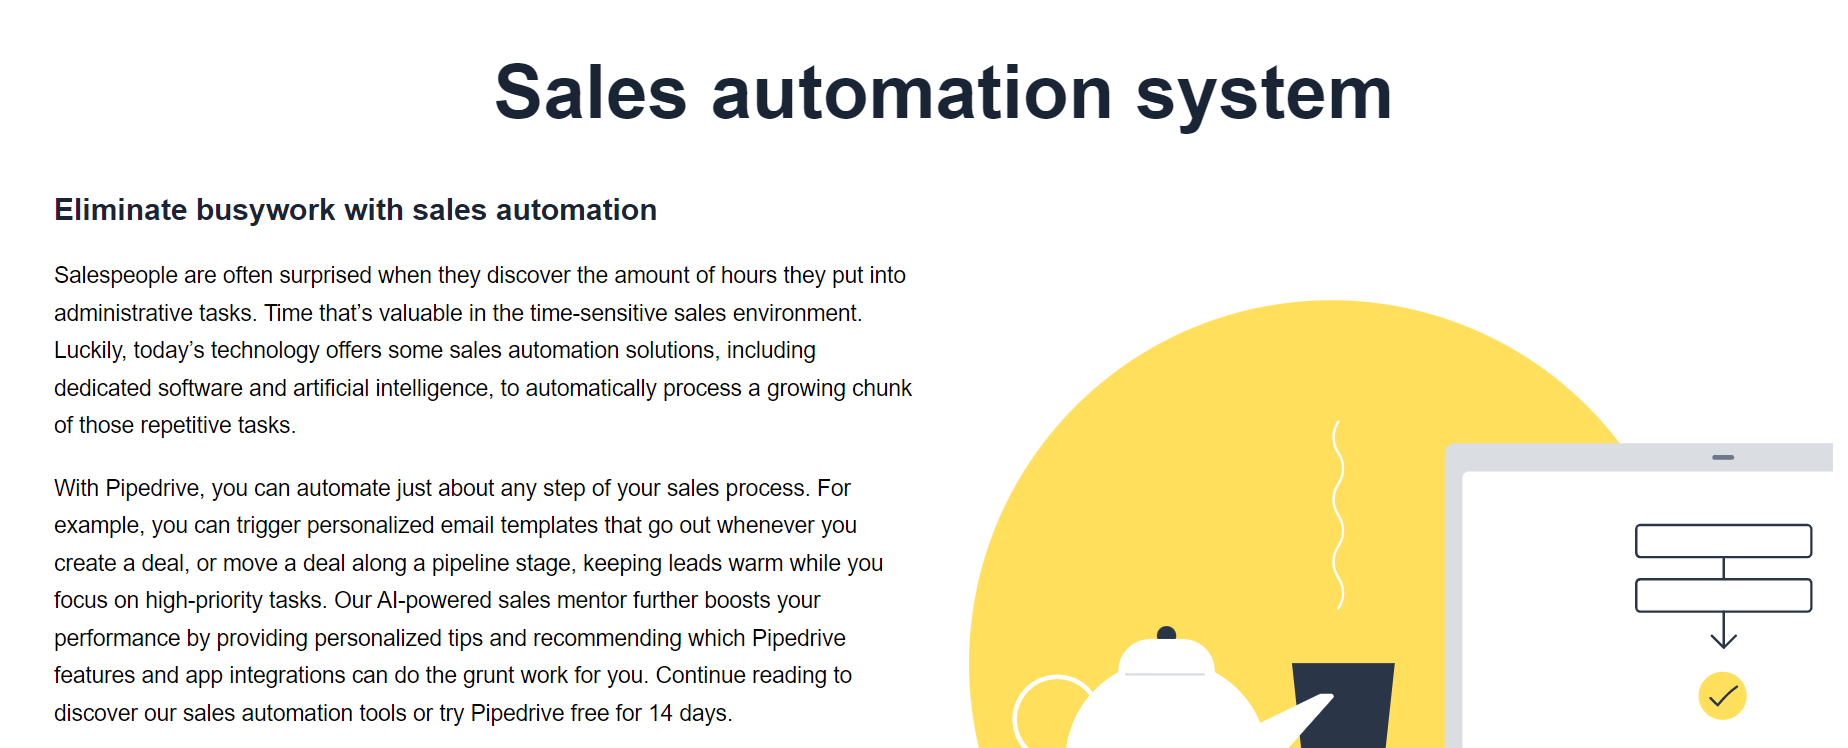 Pipedrive Sales Automation System